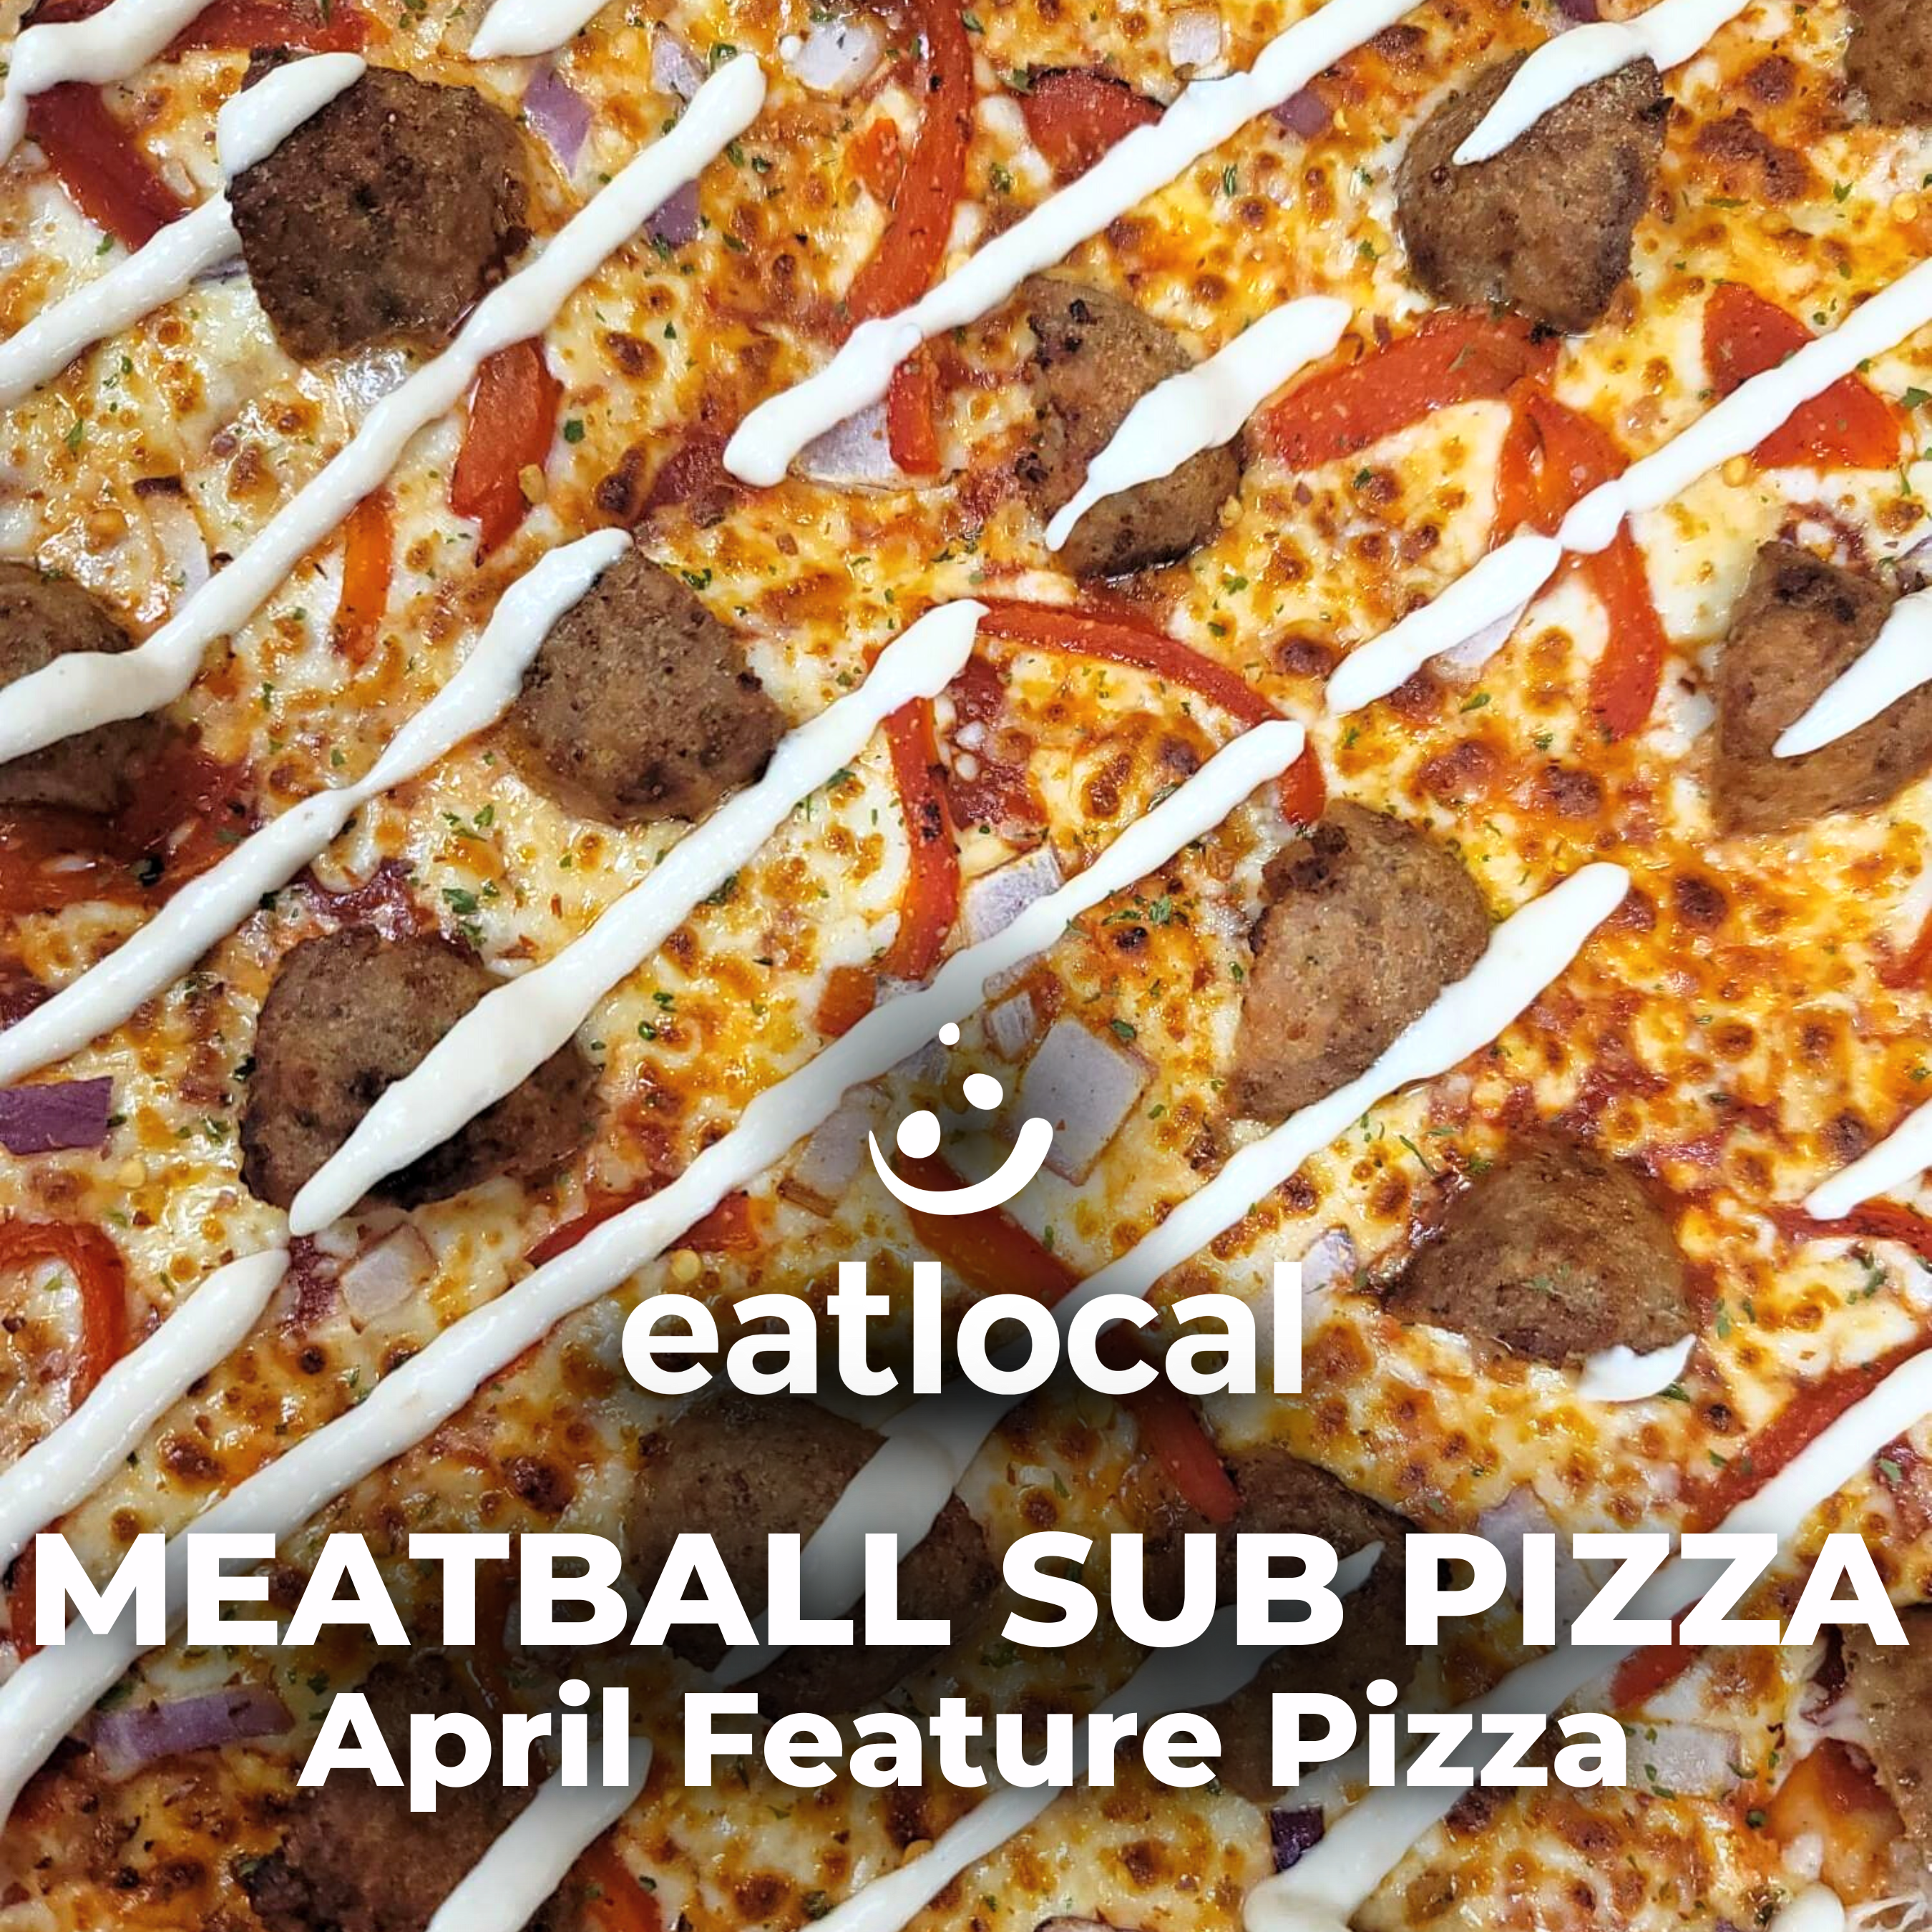 April's Feature Pizza: The Meatball Sub Pizza, a picture from our social media page.